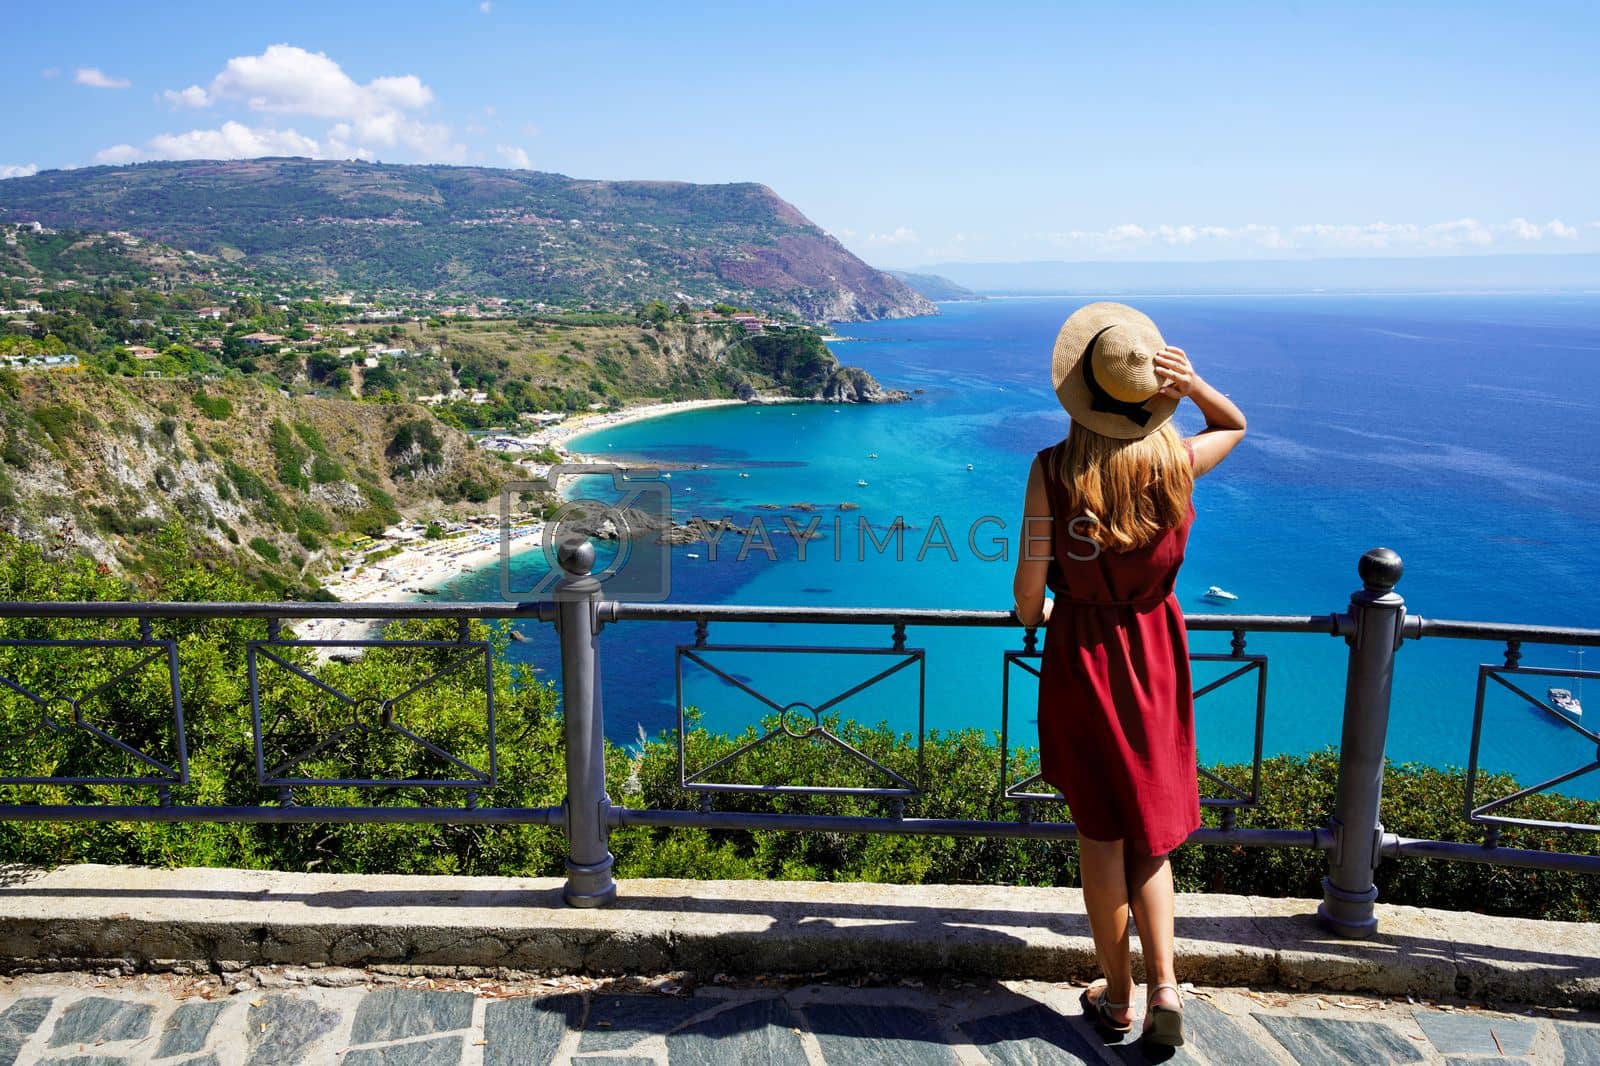 Royalty free image of Tourism in Italy. Panoramic view of young woman with hat in Capo Vaticano on the Coast of the Gods, Calabria, Italy. by sergio_monti